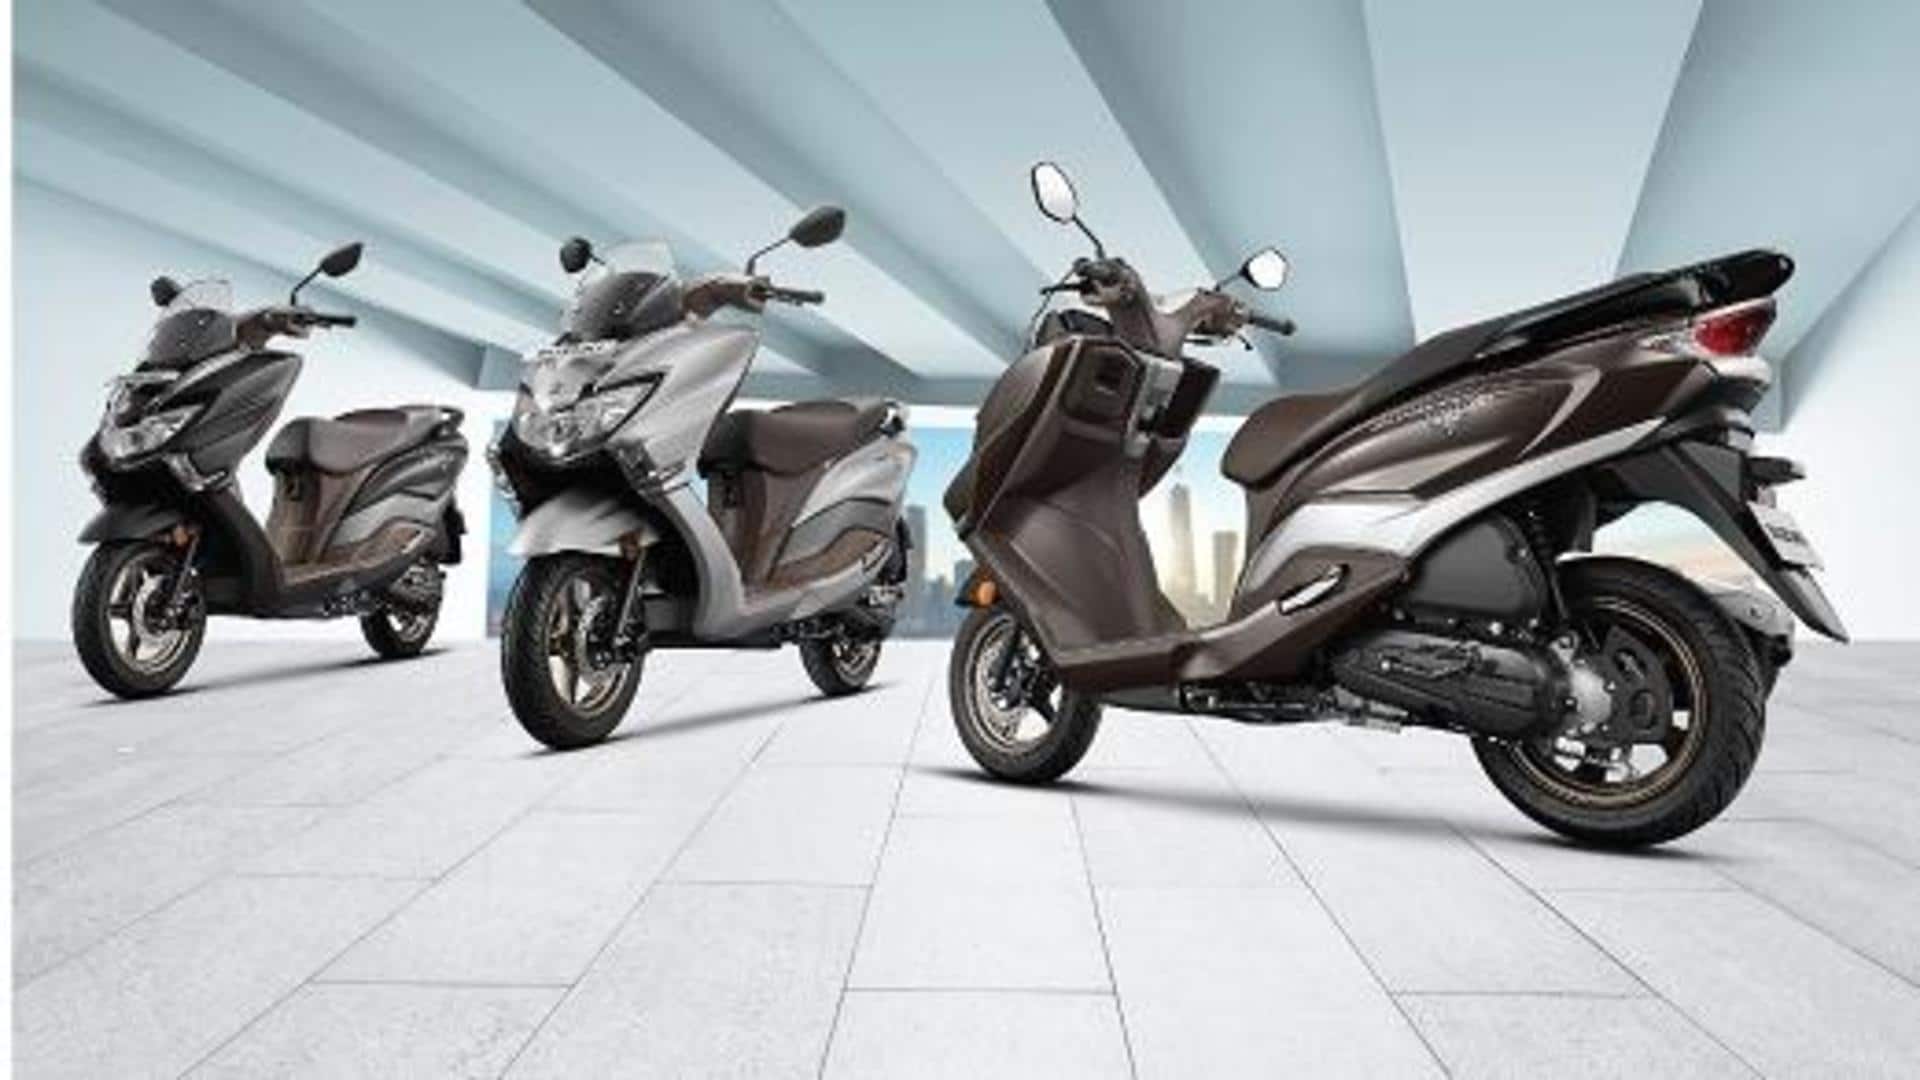 Suzuki Burgman Street EX scooter launched at Rs. 1.12 lakh